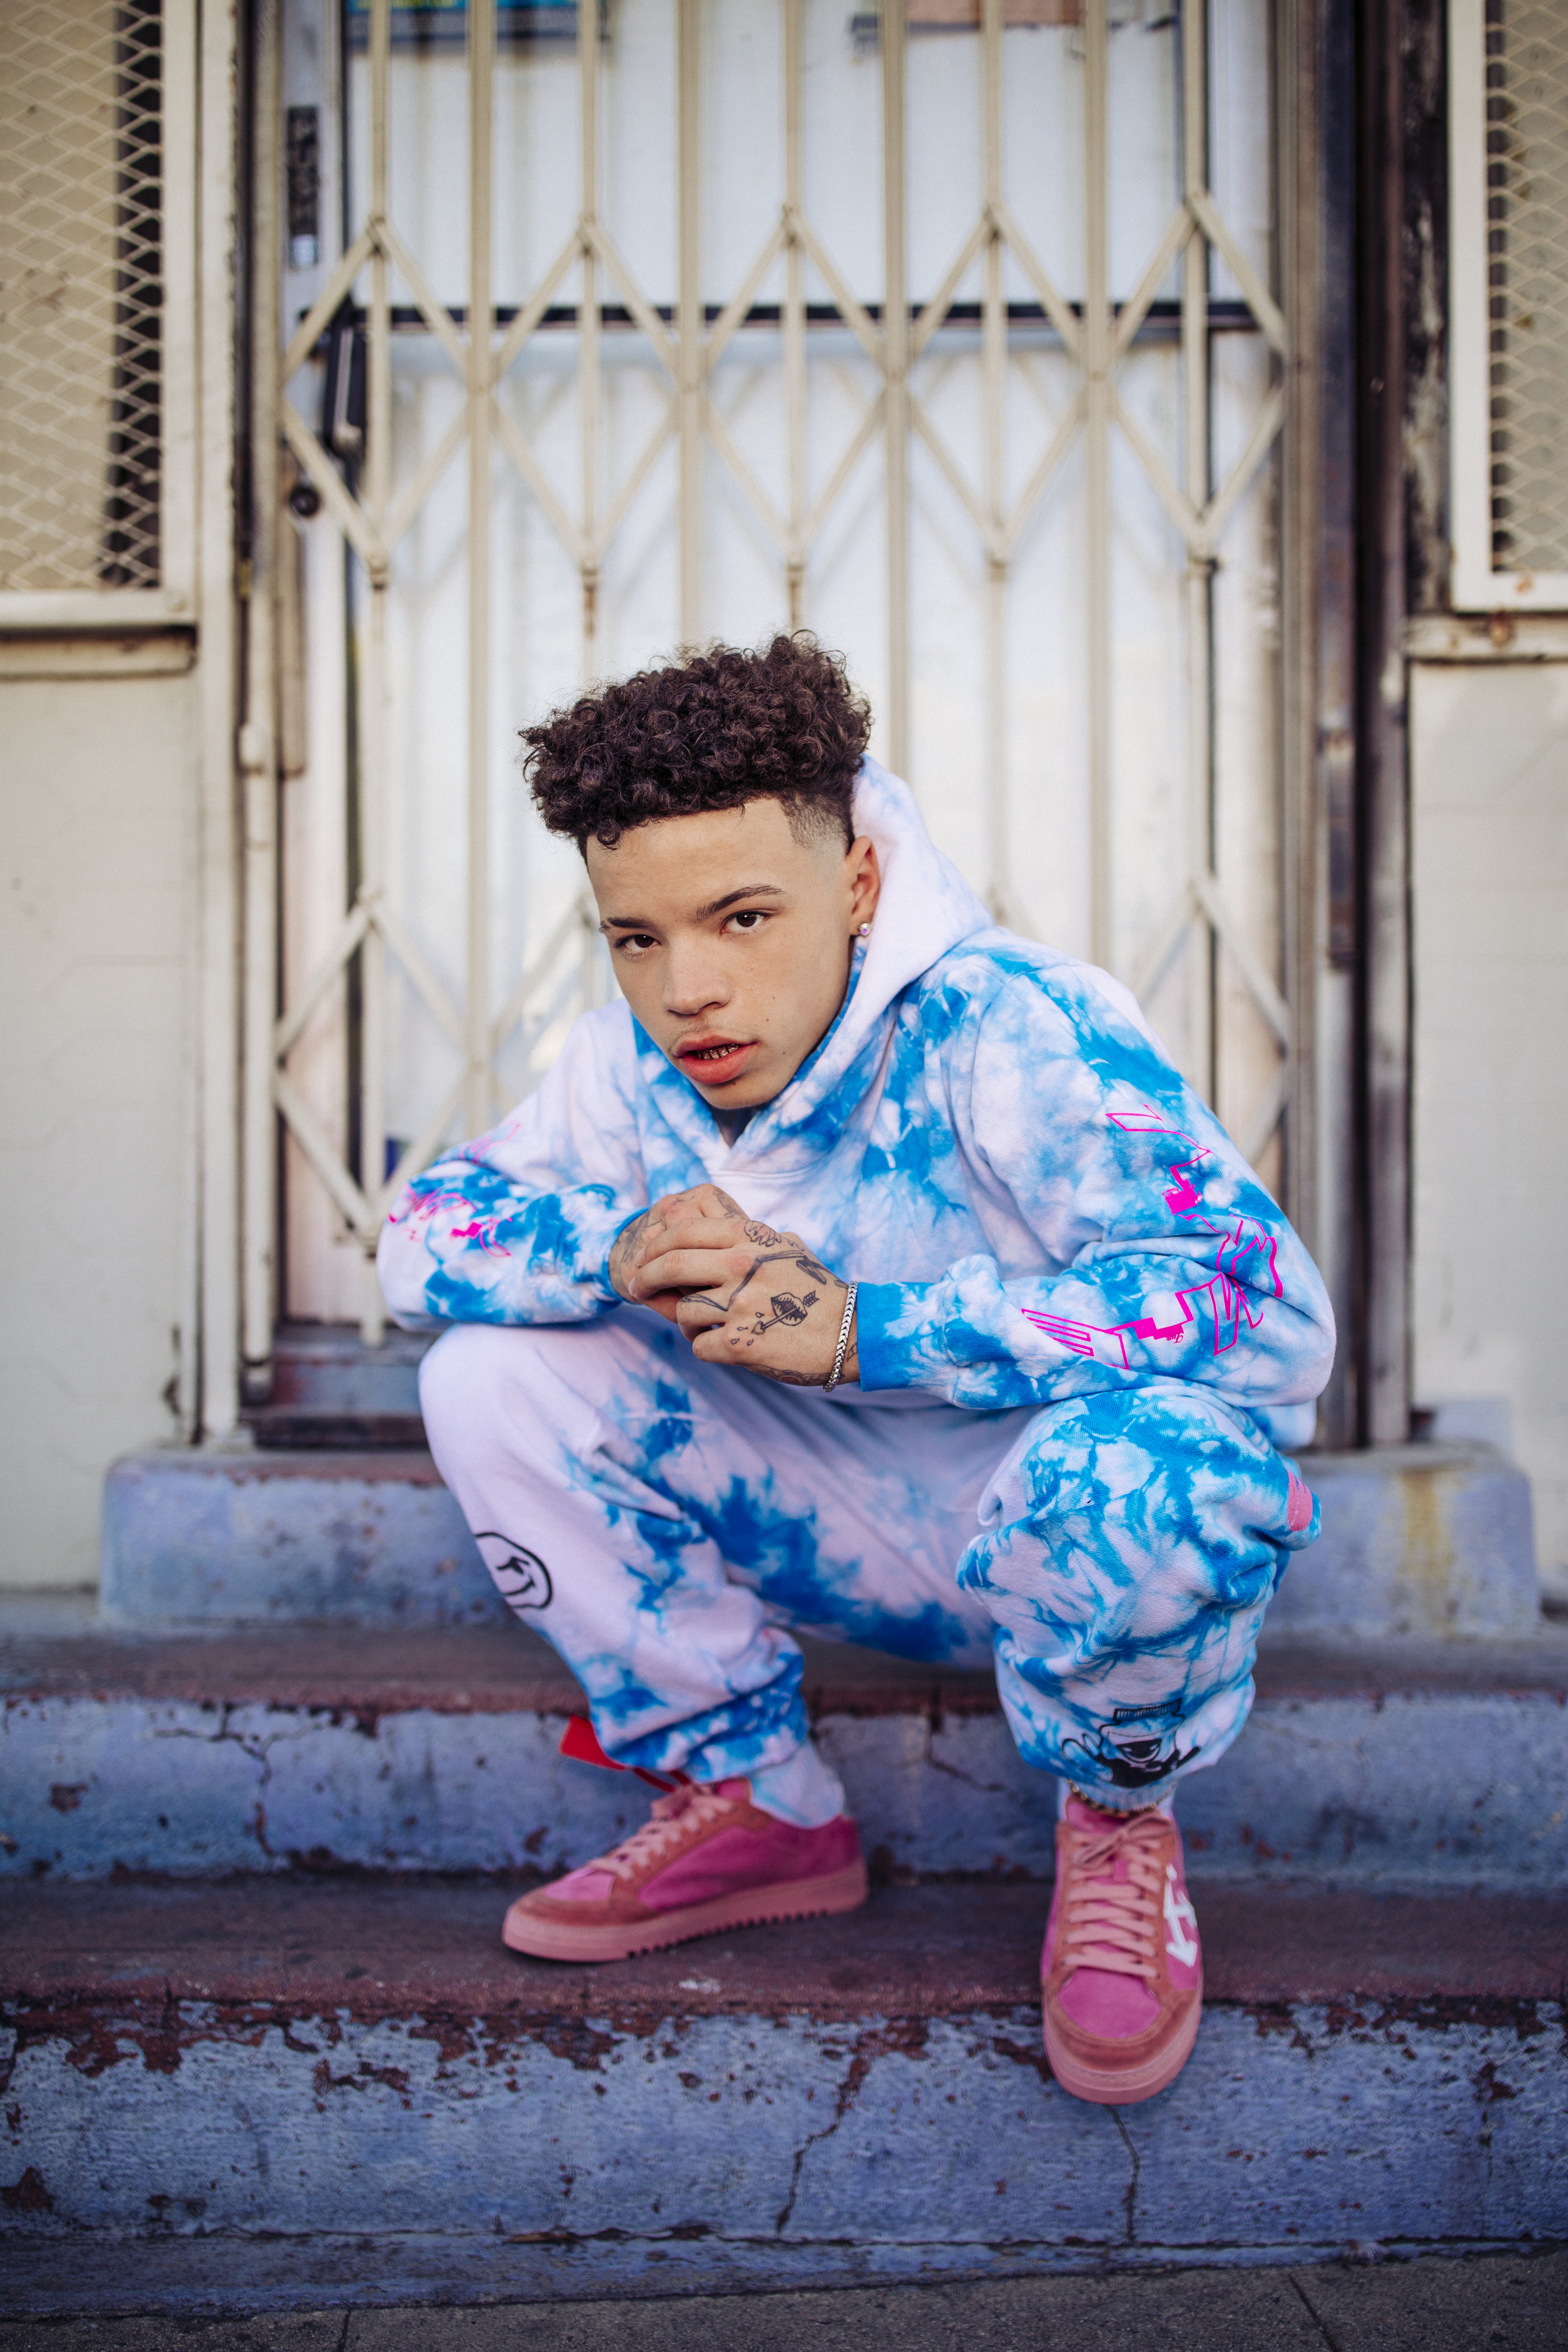 Lil Mosey Approved Photo.